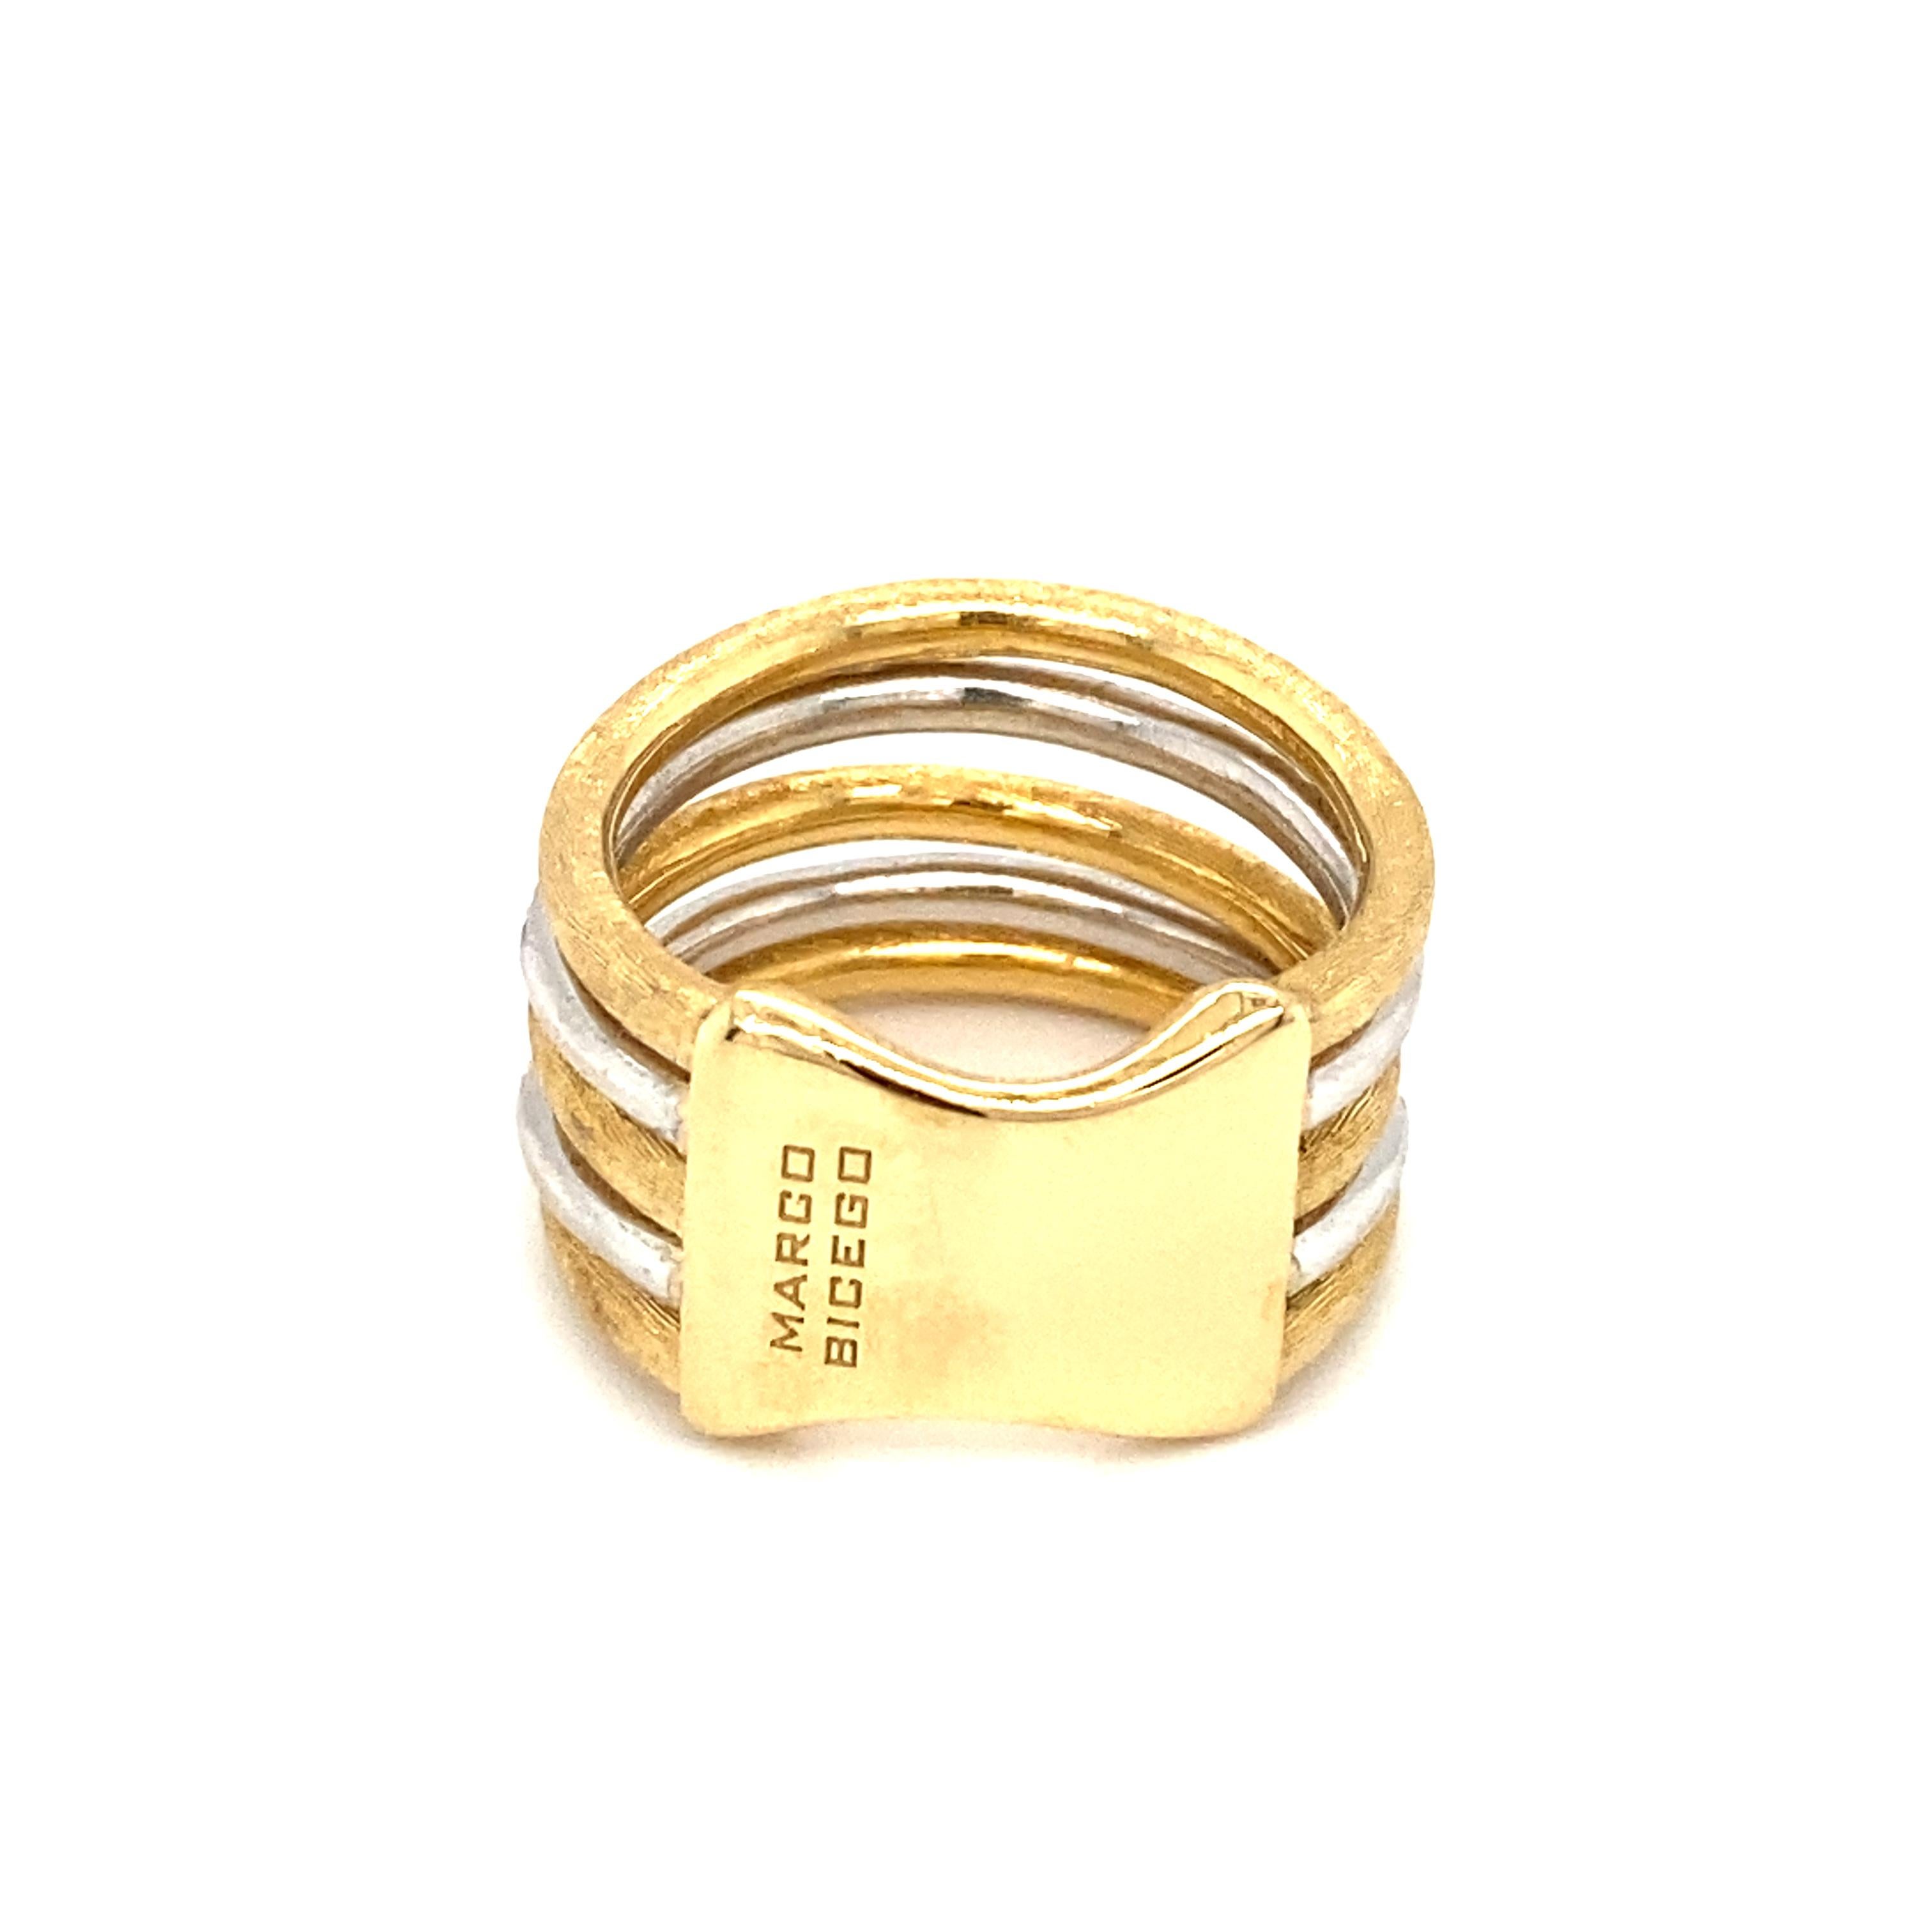 Item Details: This ring by Marco Bicego comes from the famous Jaipur collection and originally retails for $4,800. It has a unique five row design with 18 Karat Yellow and White Gold. The yellow gold is slightly textured; the white gold holds a row